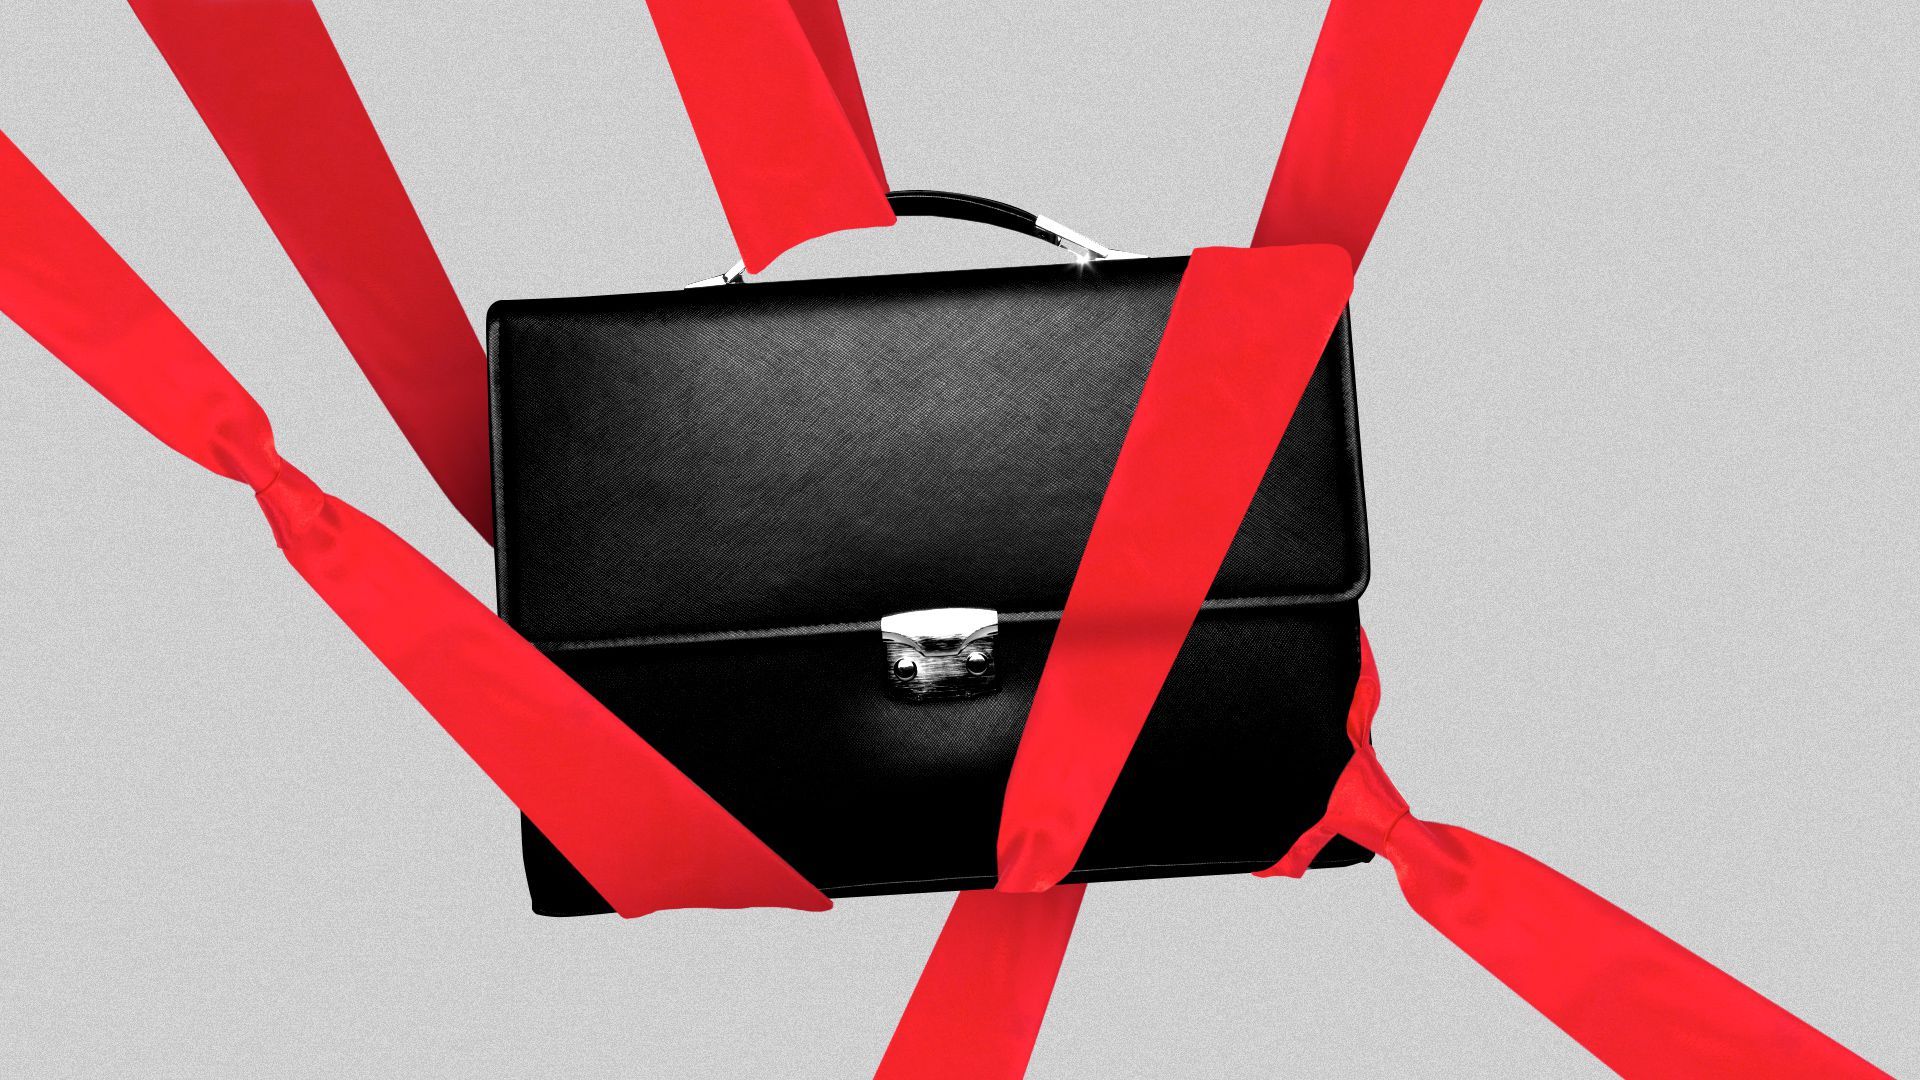 Illustration of a briefcase suspended in midair by red ties.